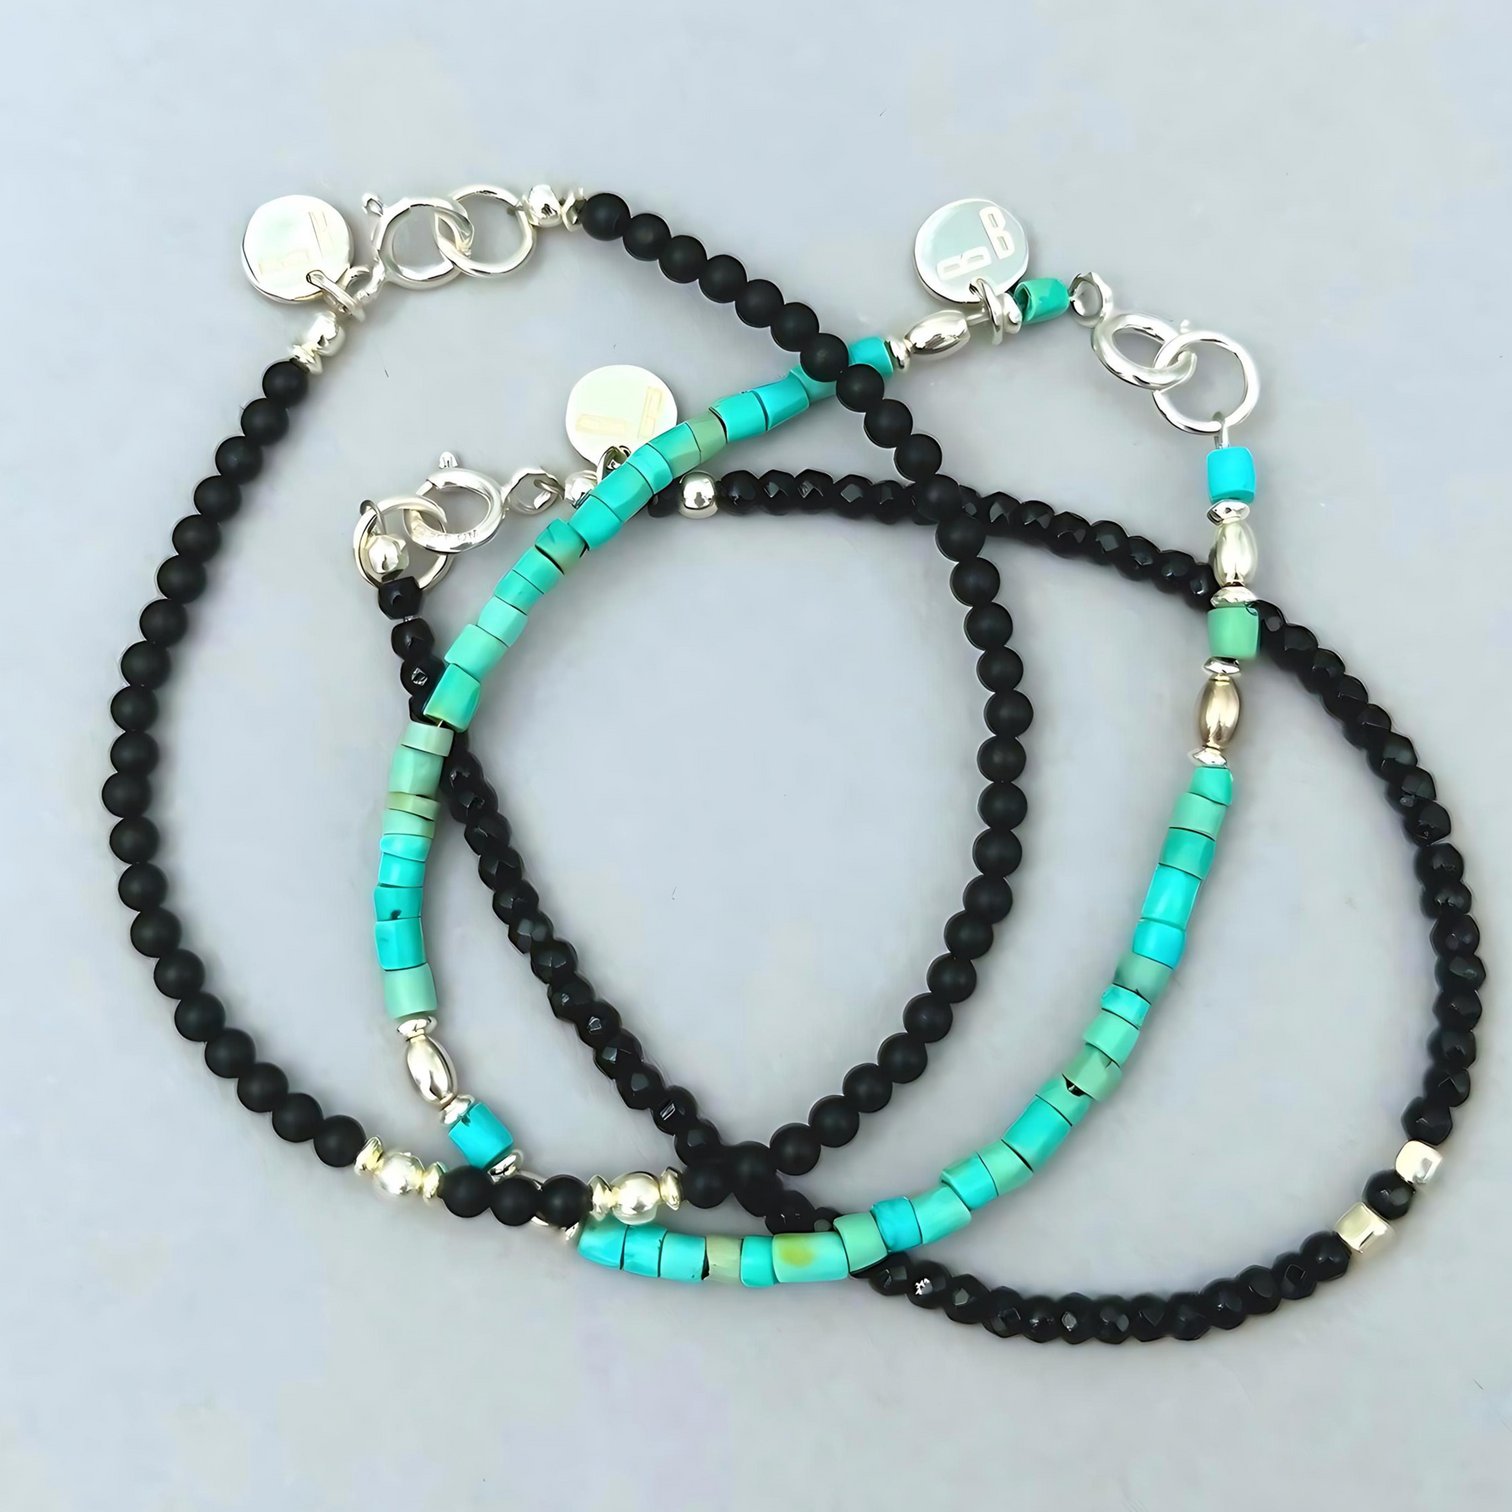 The LeBijouBijou Yara Bracelet is made with Turquoise Rondelles and a touch of silver.